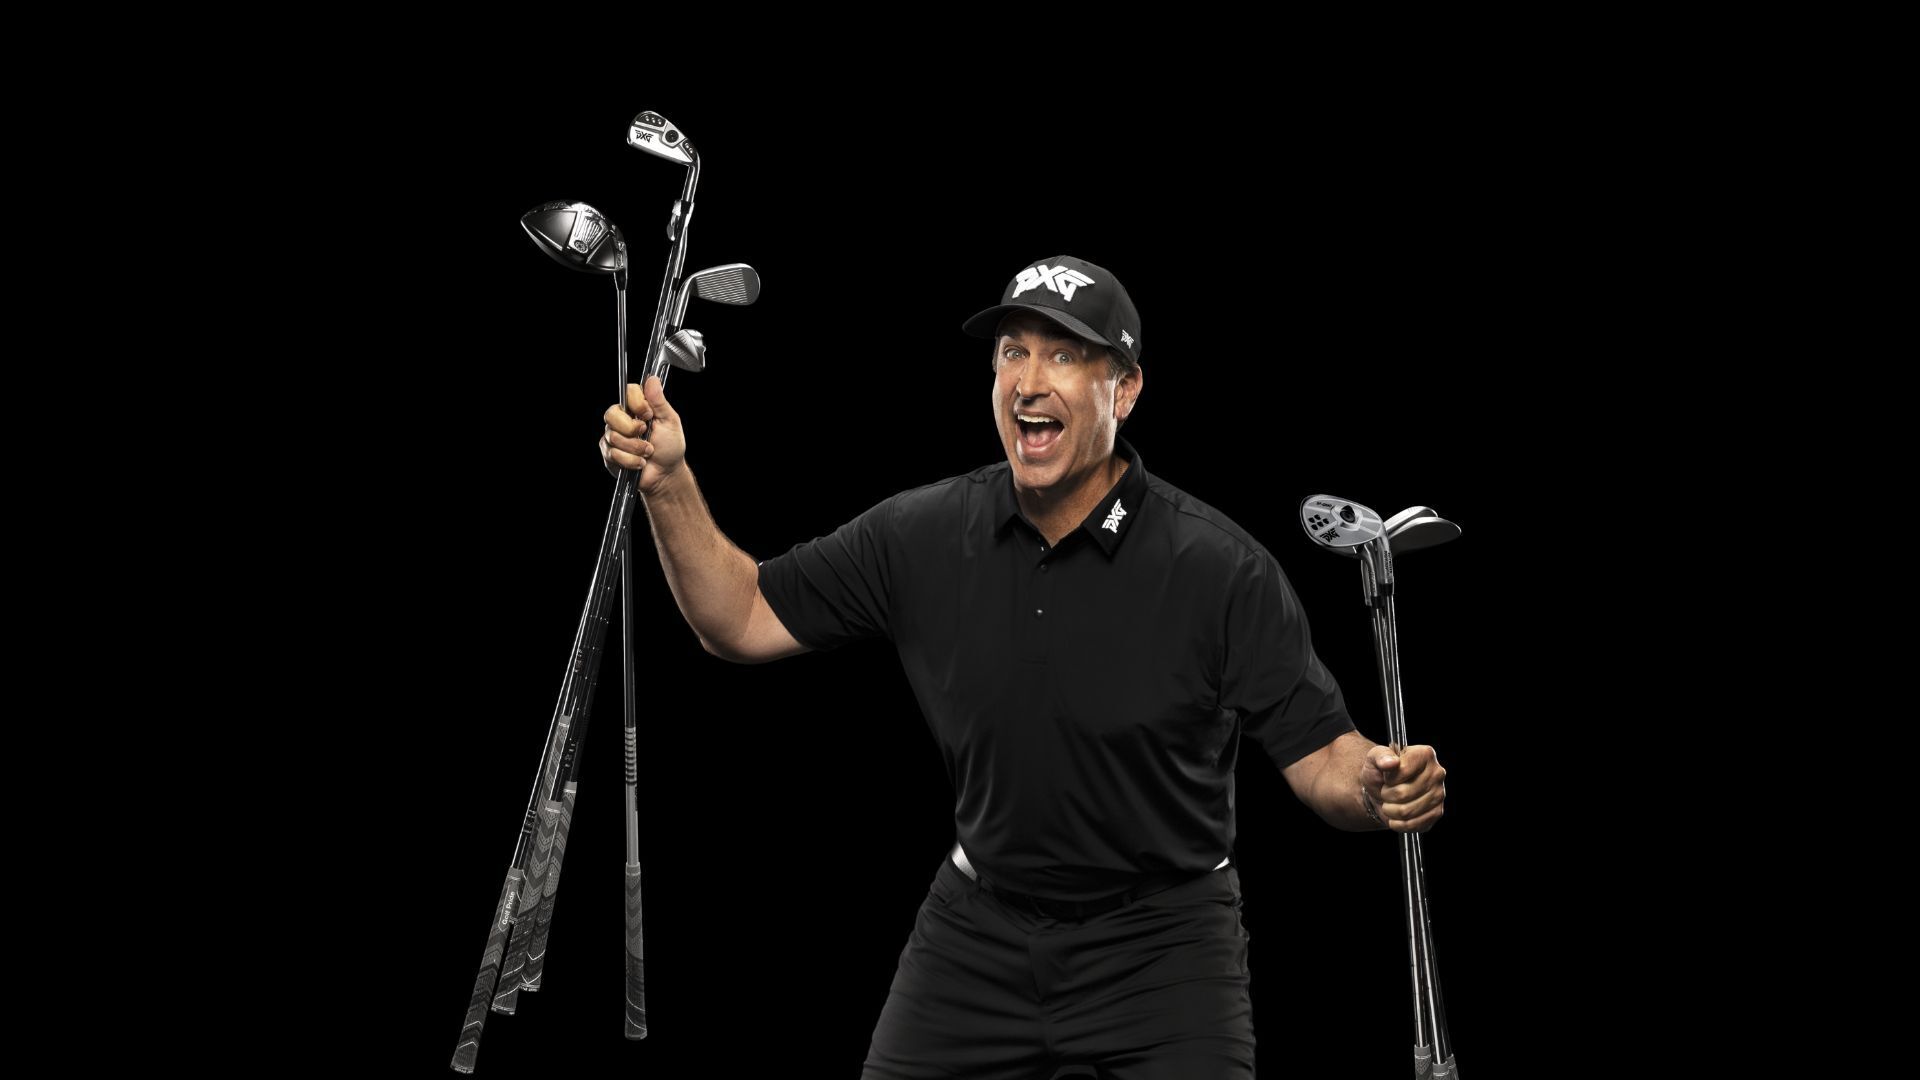 Rob Riggle holding pxg golf clubs